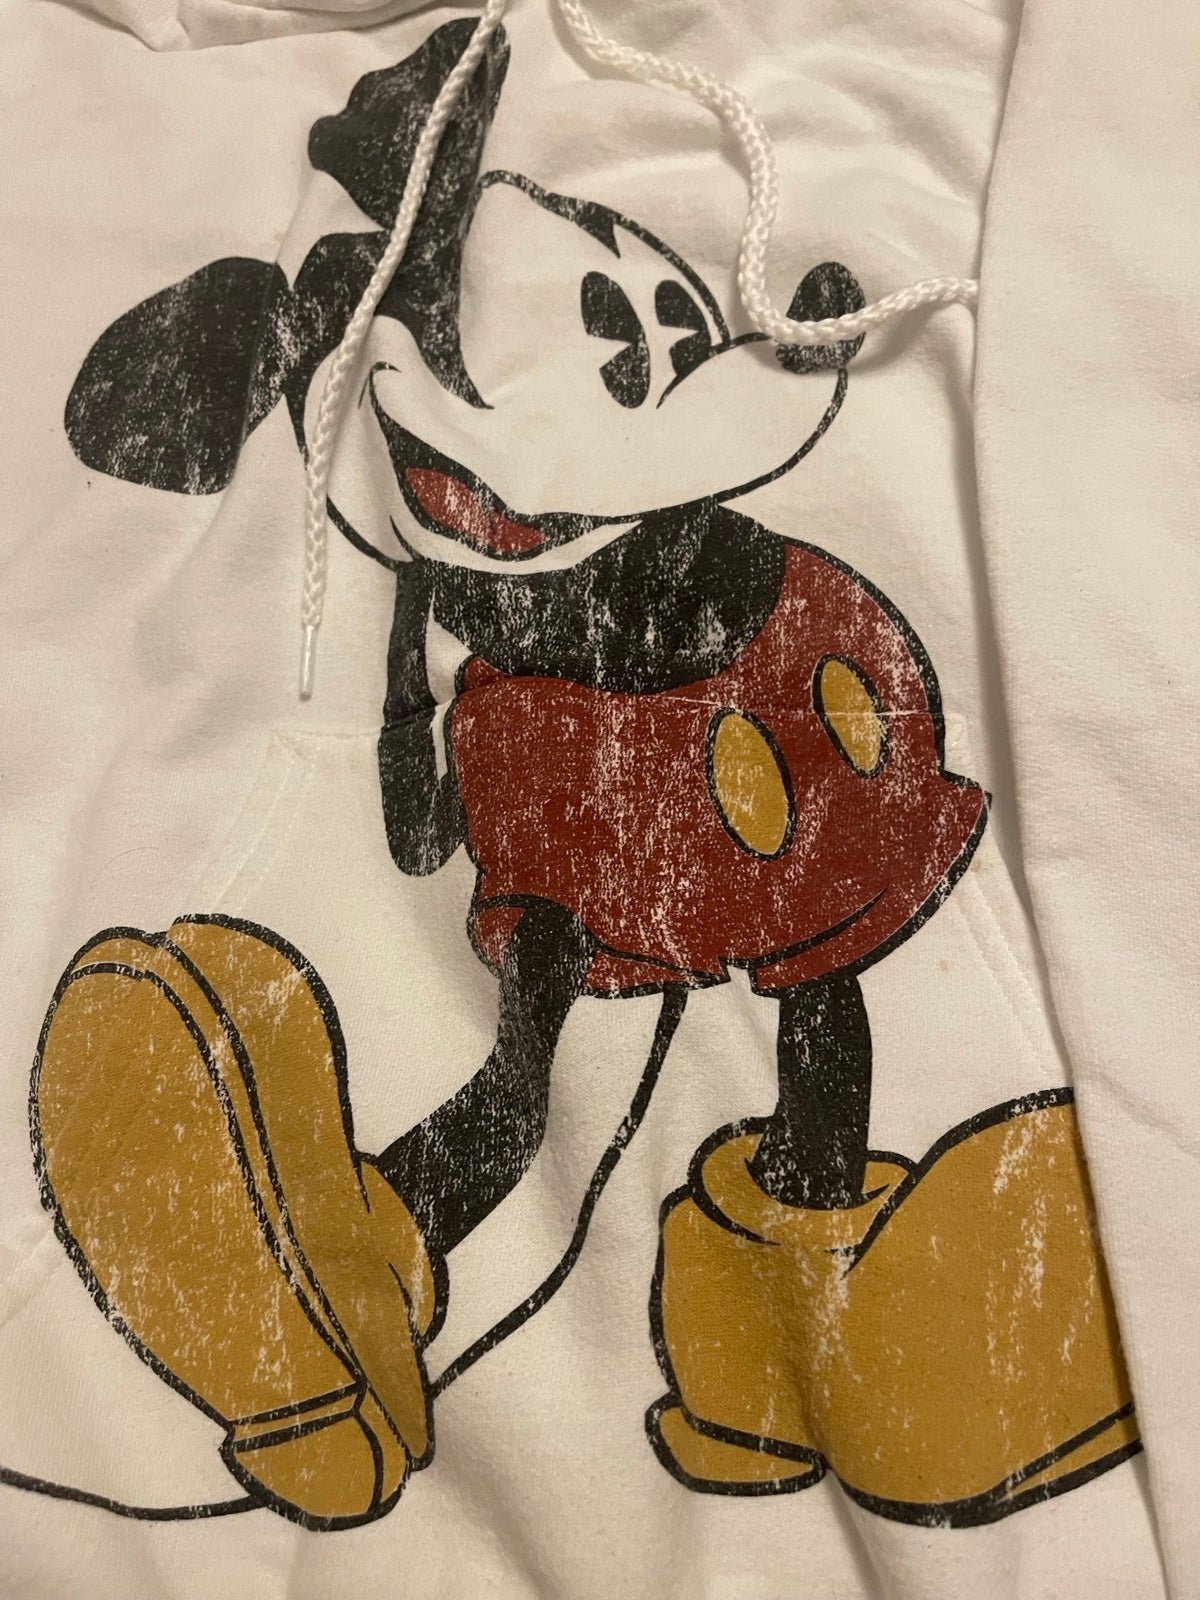 Fashion mickey mouse Disney hooded sweaters medium ld1sQeisB Hot Sale